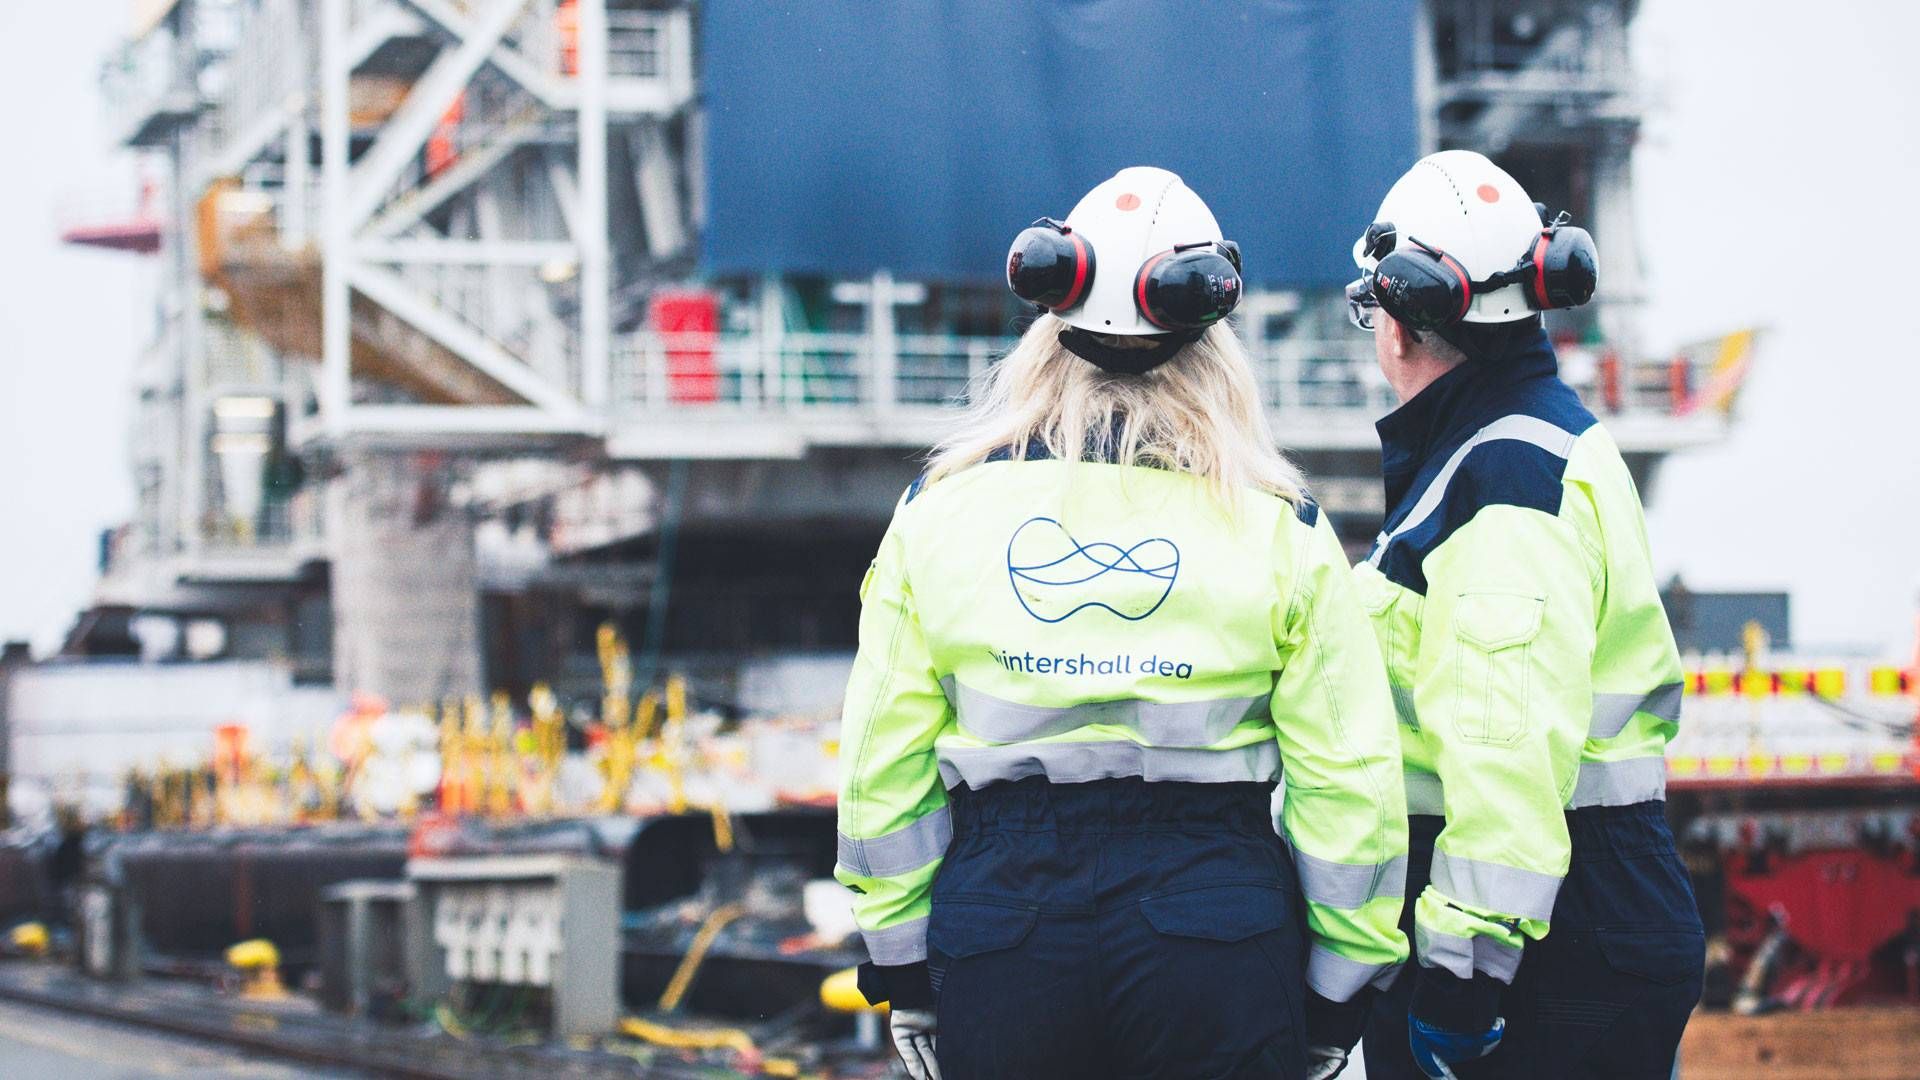 Wintershall Dea now holds three licenses in the North Sea, two in Norway and one in Denmark | Photo: Wintershall Dea - Pr